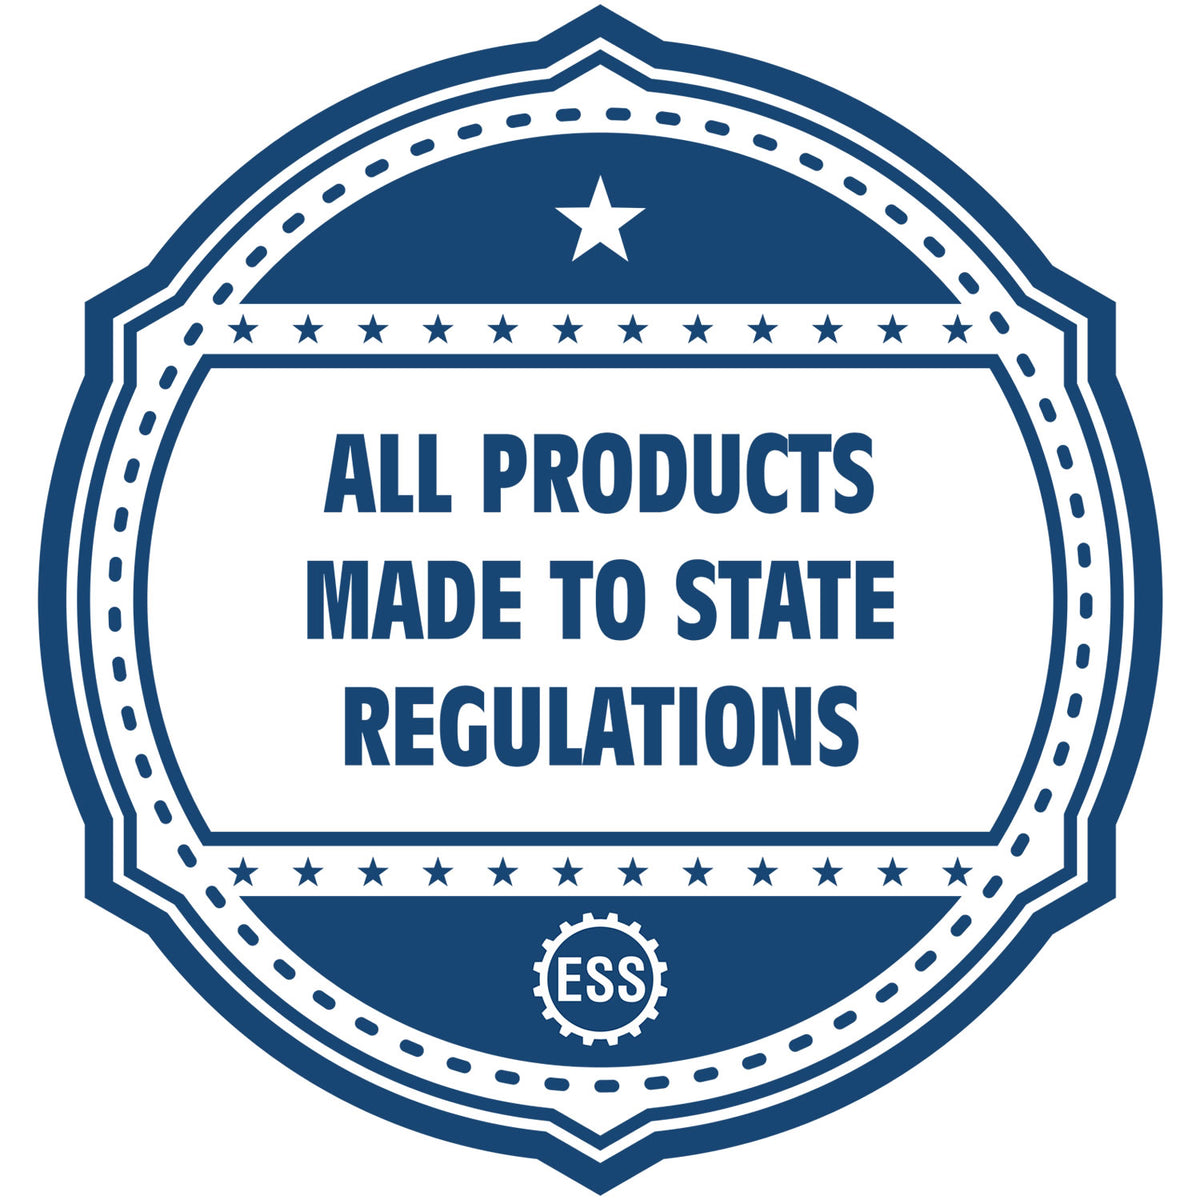 An icon or badge element for the MaxLight Premium Pre-Inked Massachusetts State Seal Notarial Stamp showing that this product is made in compliance with state regulations.